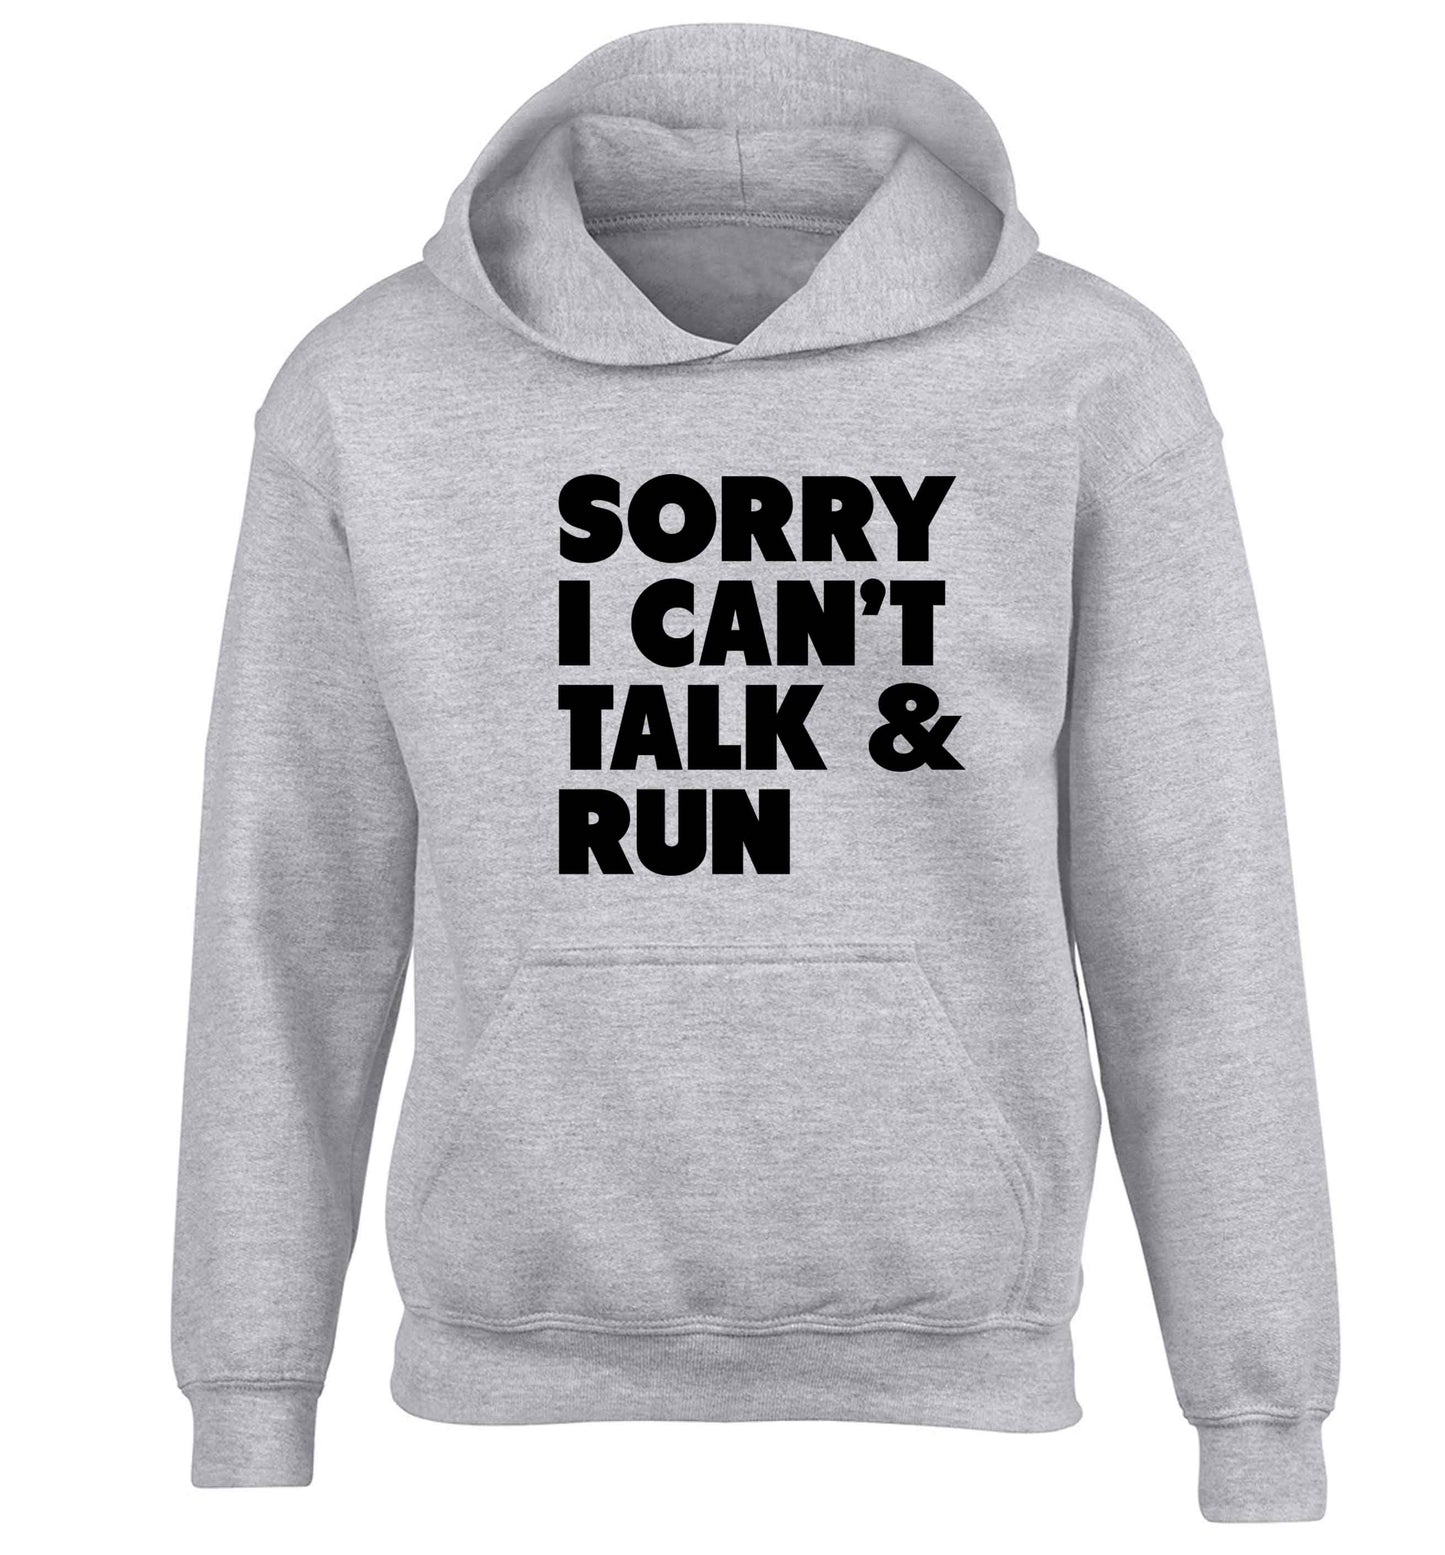 Sorry I can't talk and run children's grey hoodie 12-13 Years